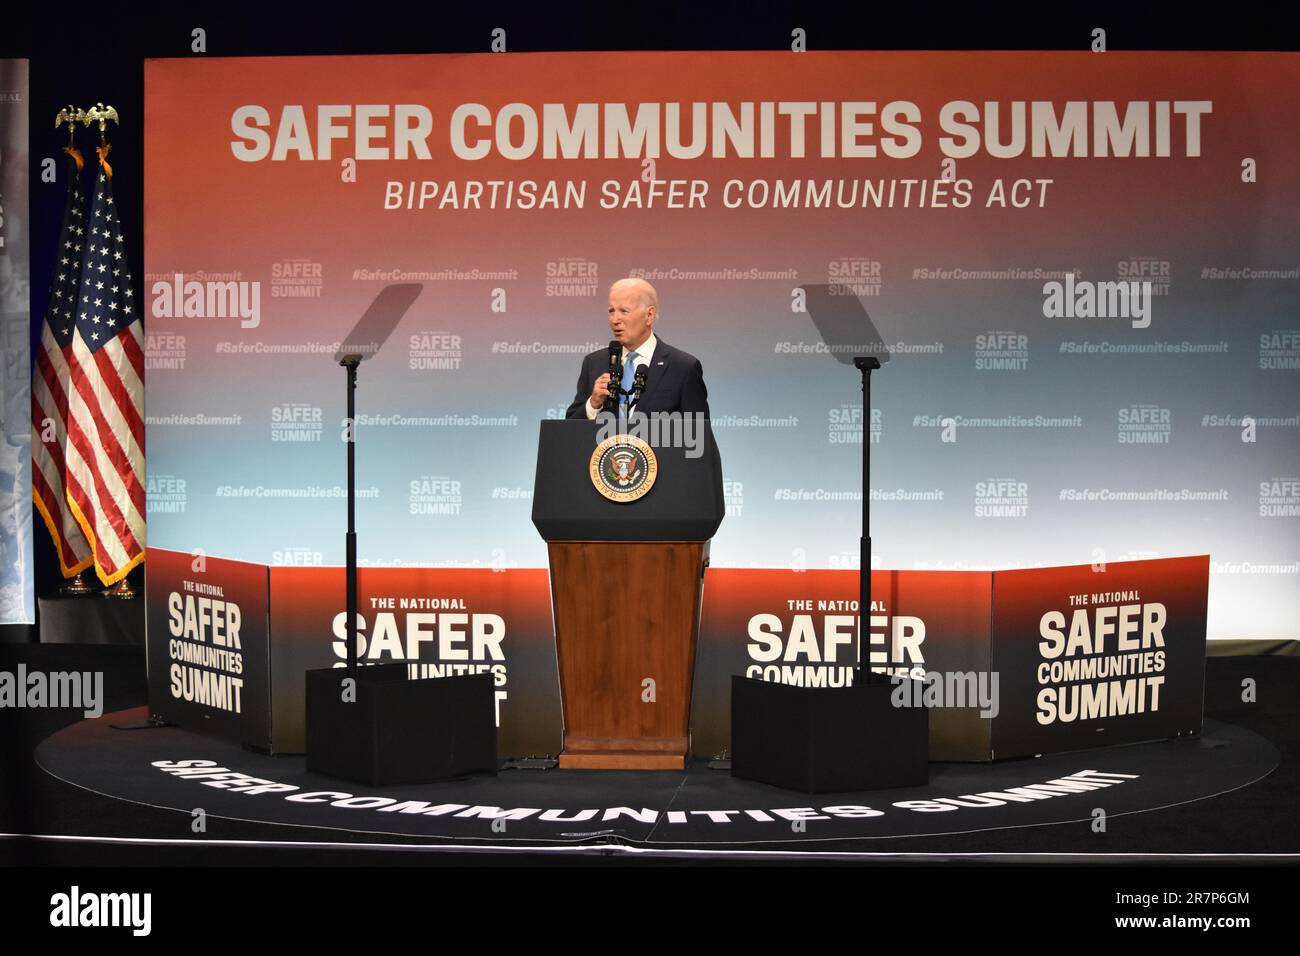 President of the United States Joe Biden was passionate during his speech and at times complained why the United States of America has the amount of gun violence it is suffering from. President of the United States Joe Biden delivers remarks at the National Safer Communities Summit at Hartford University in West Hartford. President Biden called on Congress to act on gun reform and praised the bipartisan safer communities act. President Biden told the crowd that if the United States Congress did not act, that 'it is time to get a new Congress.' Stock Photo